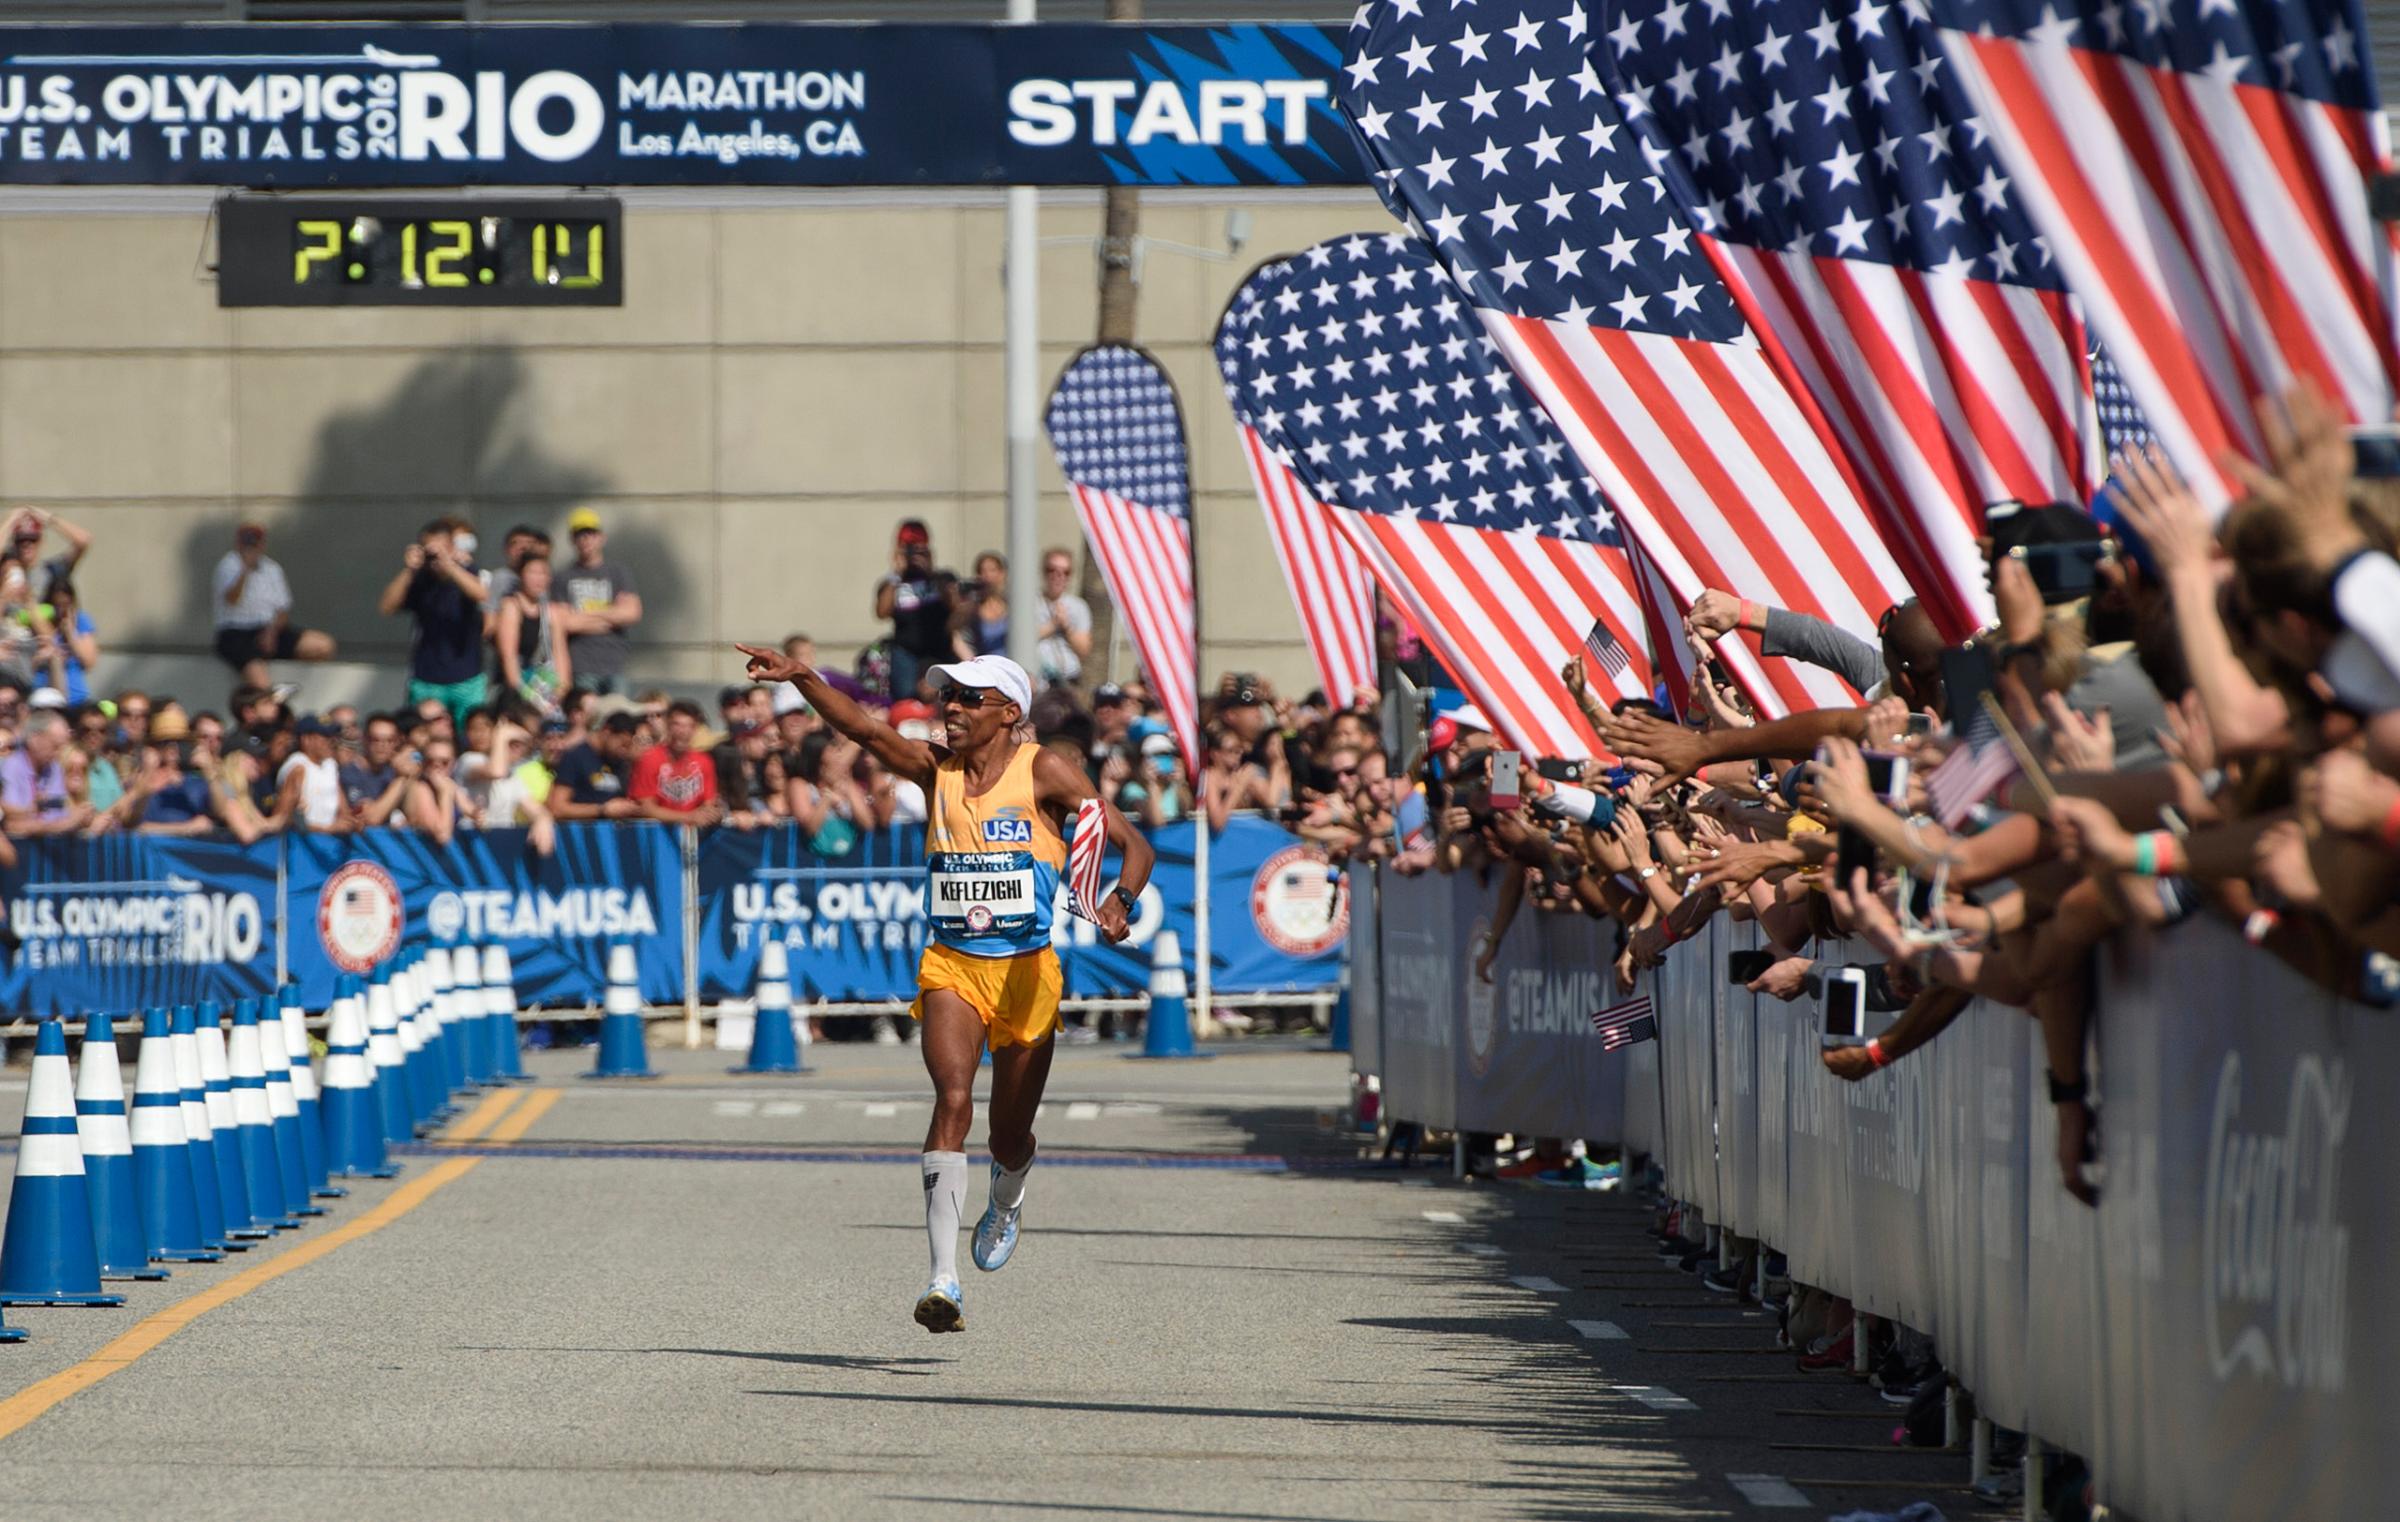 Meb Keflezighi—The ageless Keflezighi, who won the first Boston Marathon after the 2013 bombings, will be a sentimental favorite in the Rio marathon.